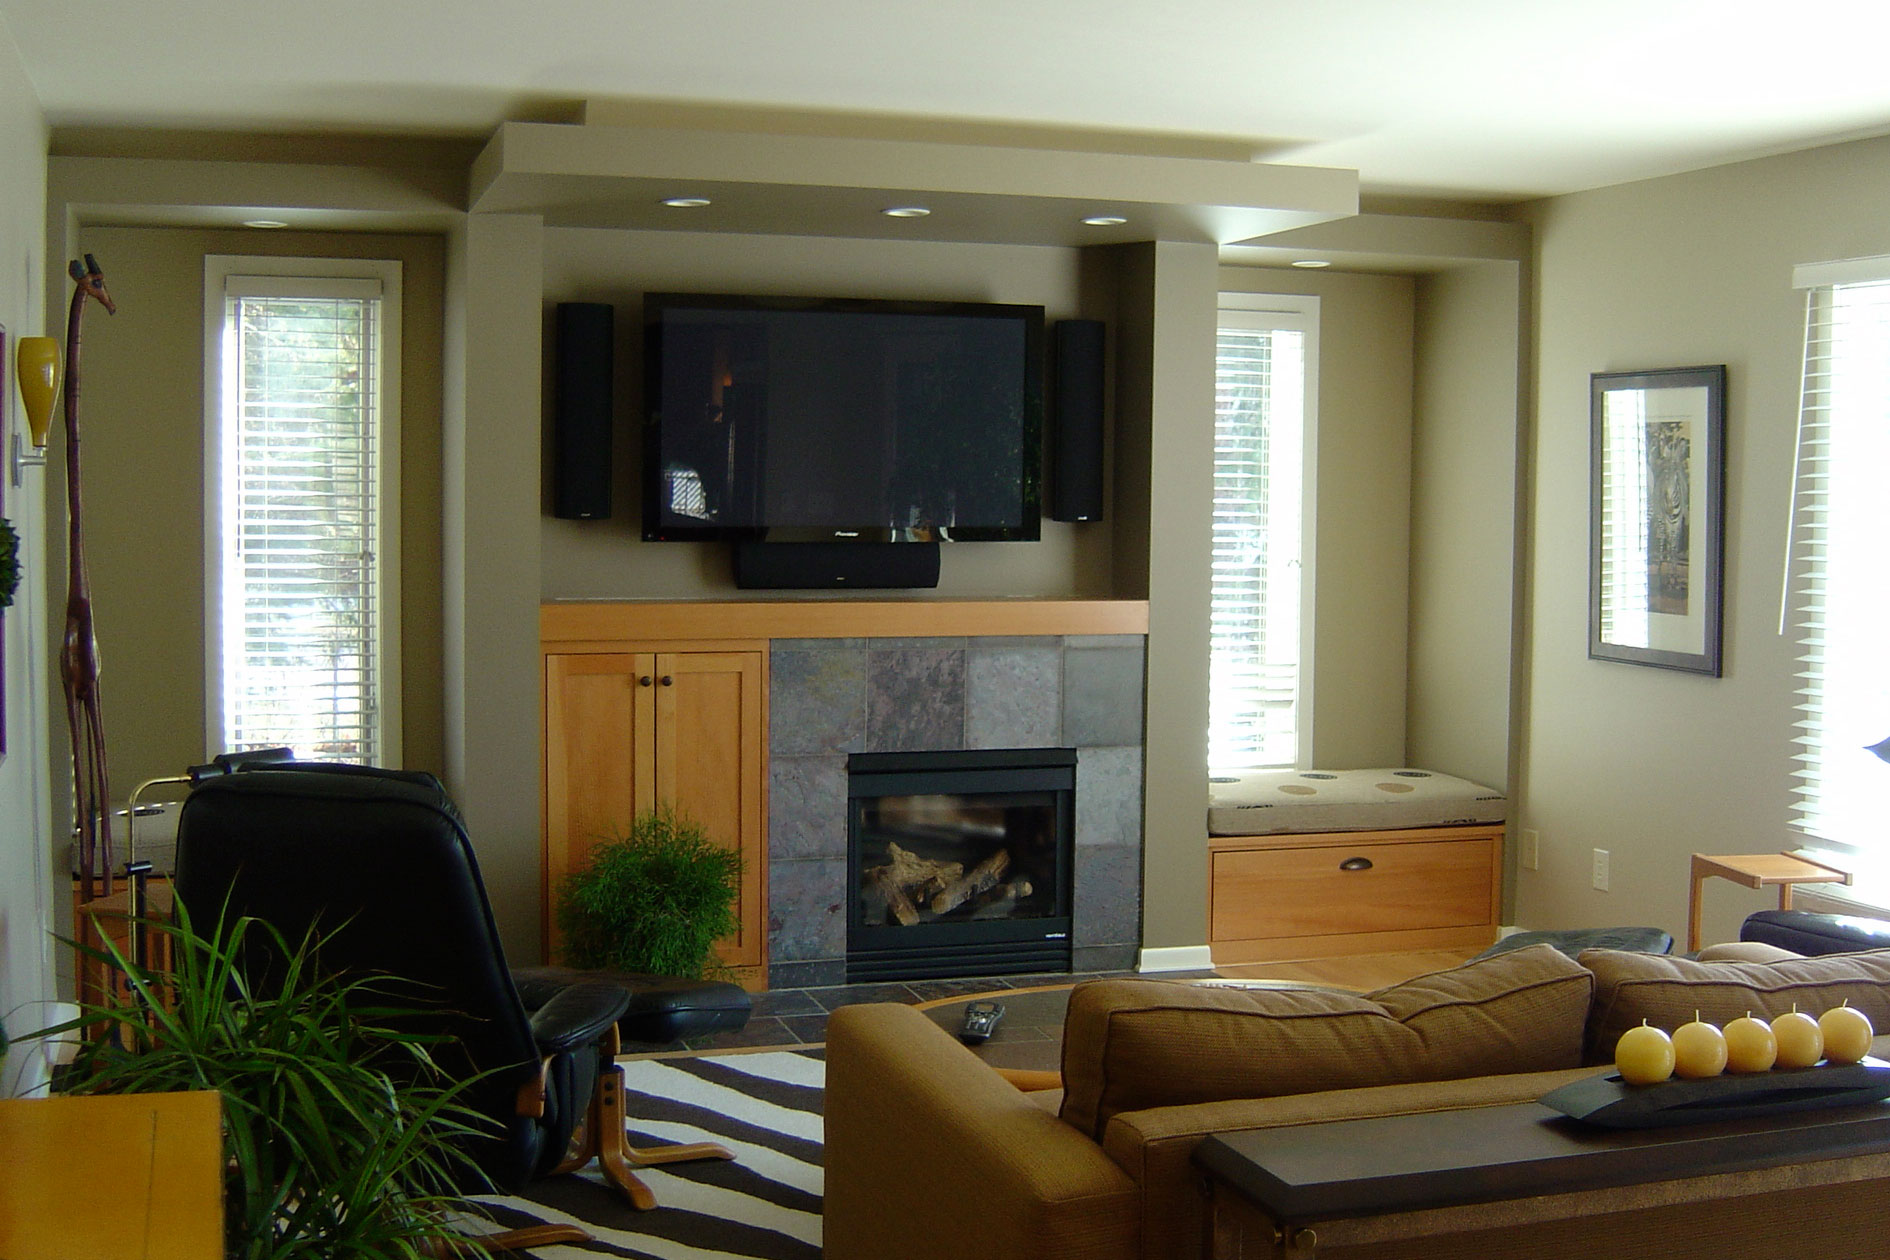 Family Room with New Fireplace, Entertainment Center, and Window Seats